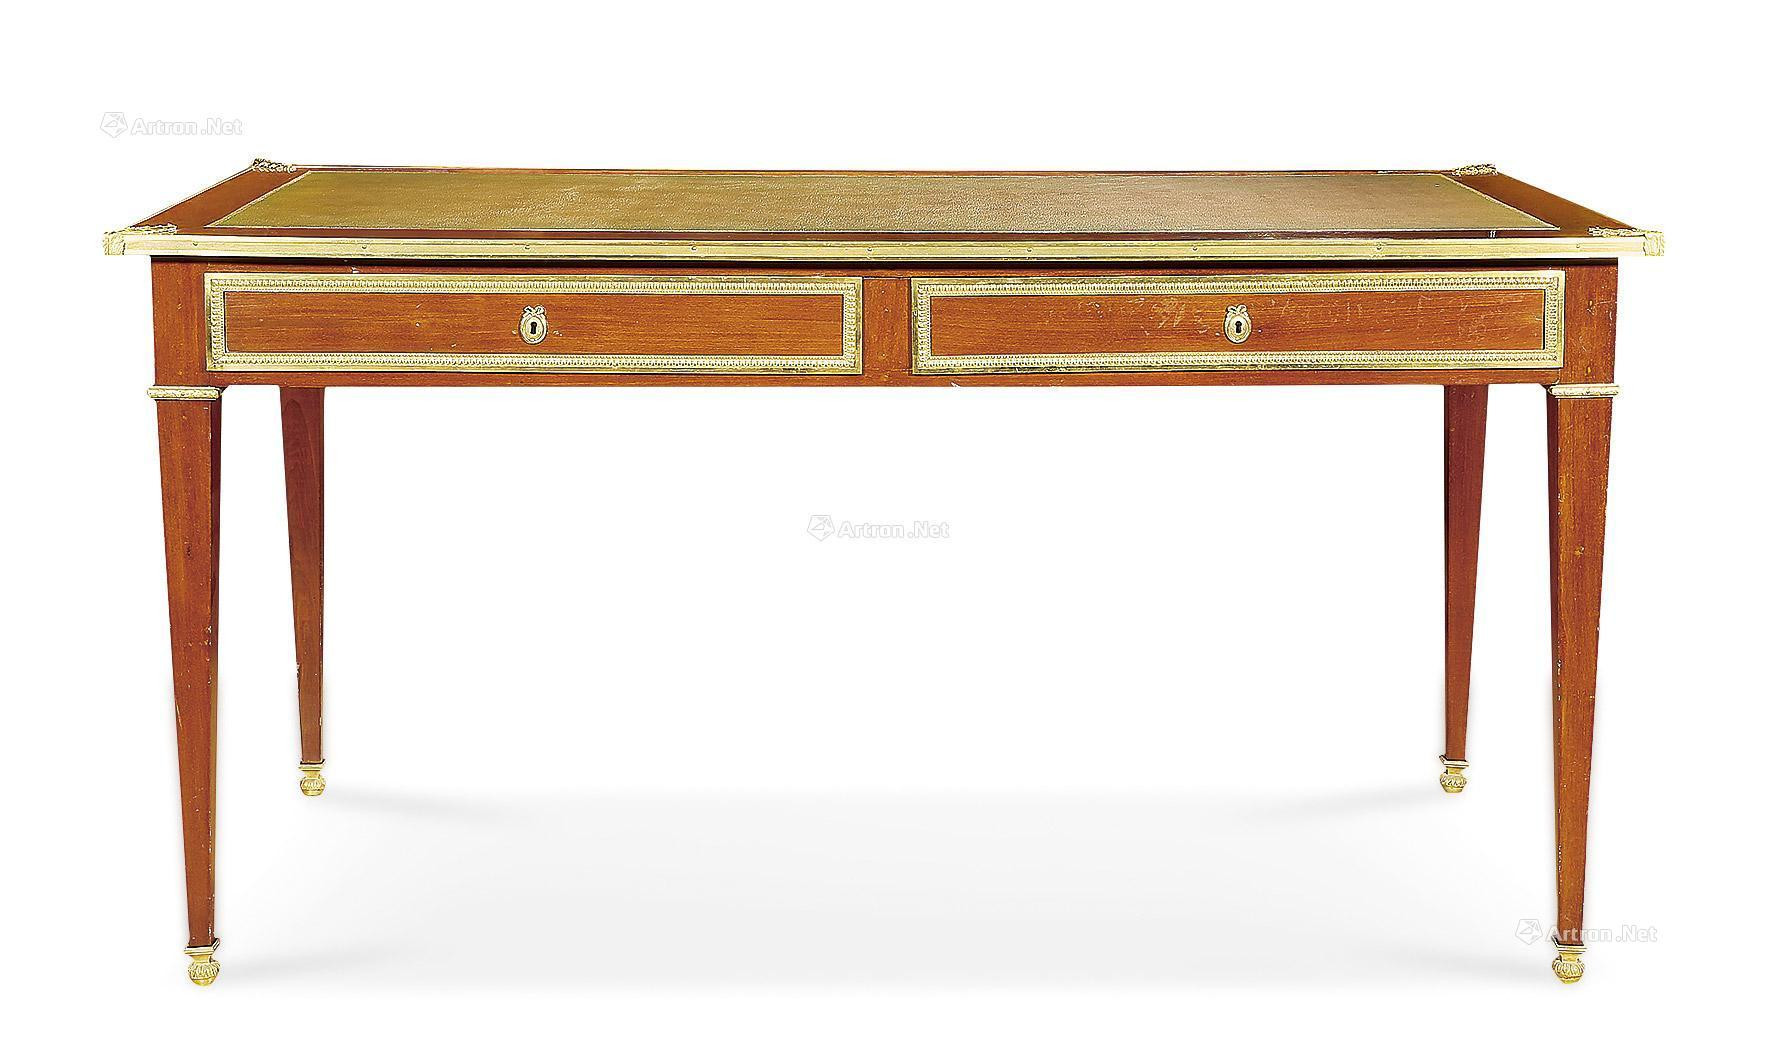 A FRENCH LOUIS XVI STYLE GILT BRONZE LEATHER TOP WRITING DESK